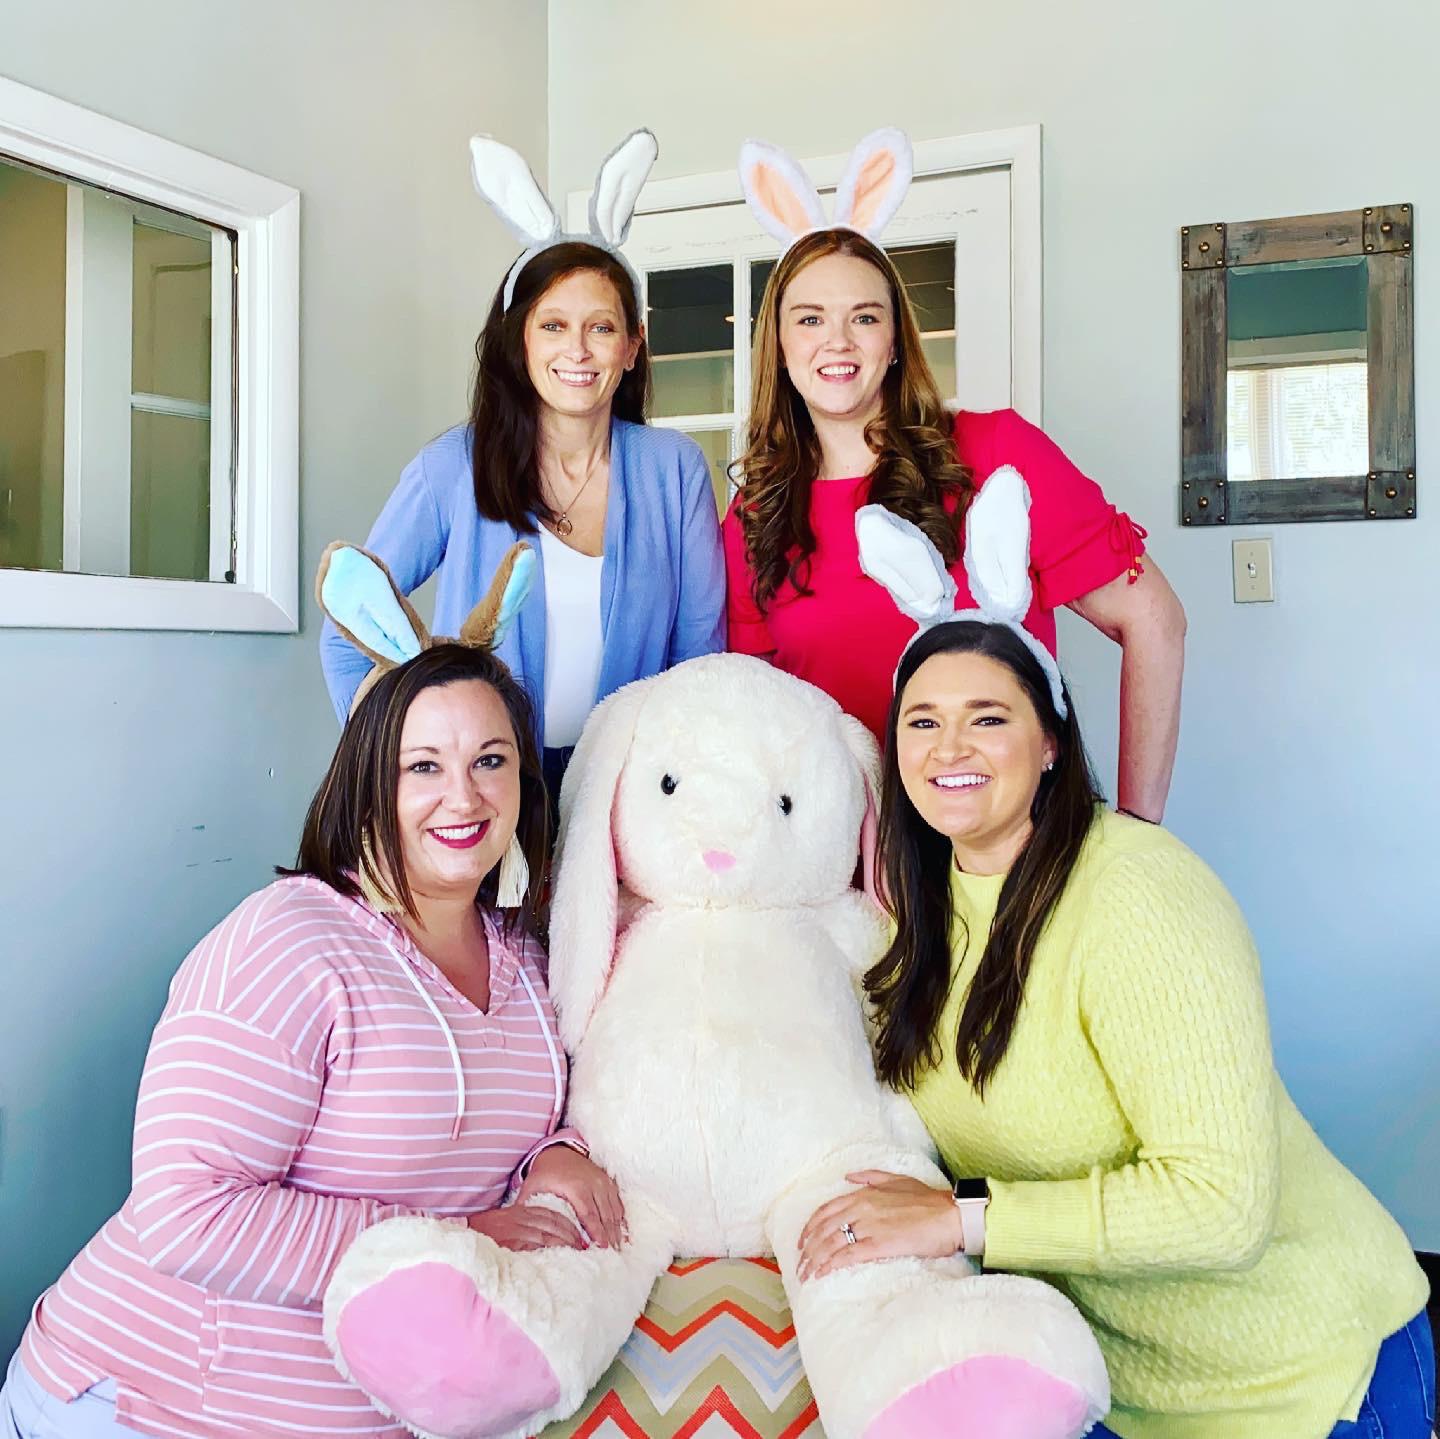 We are egg-cited to hop into Easter weekend. We hope every-bunny enjoys the holiday!